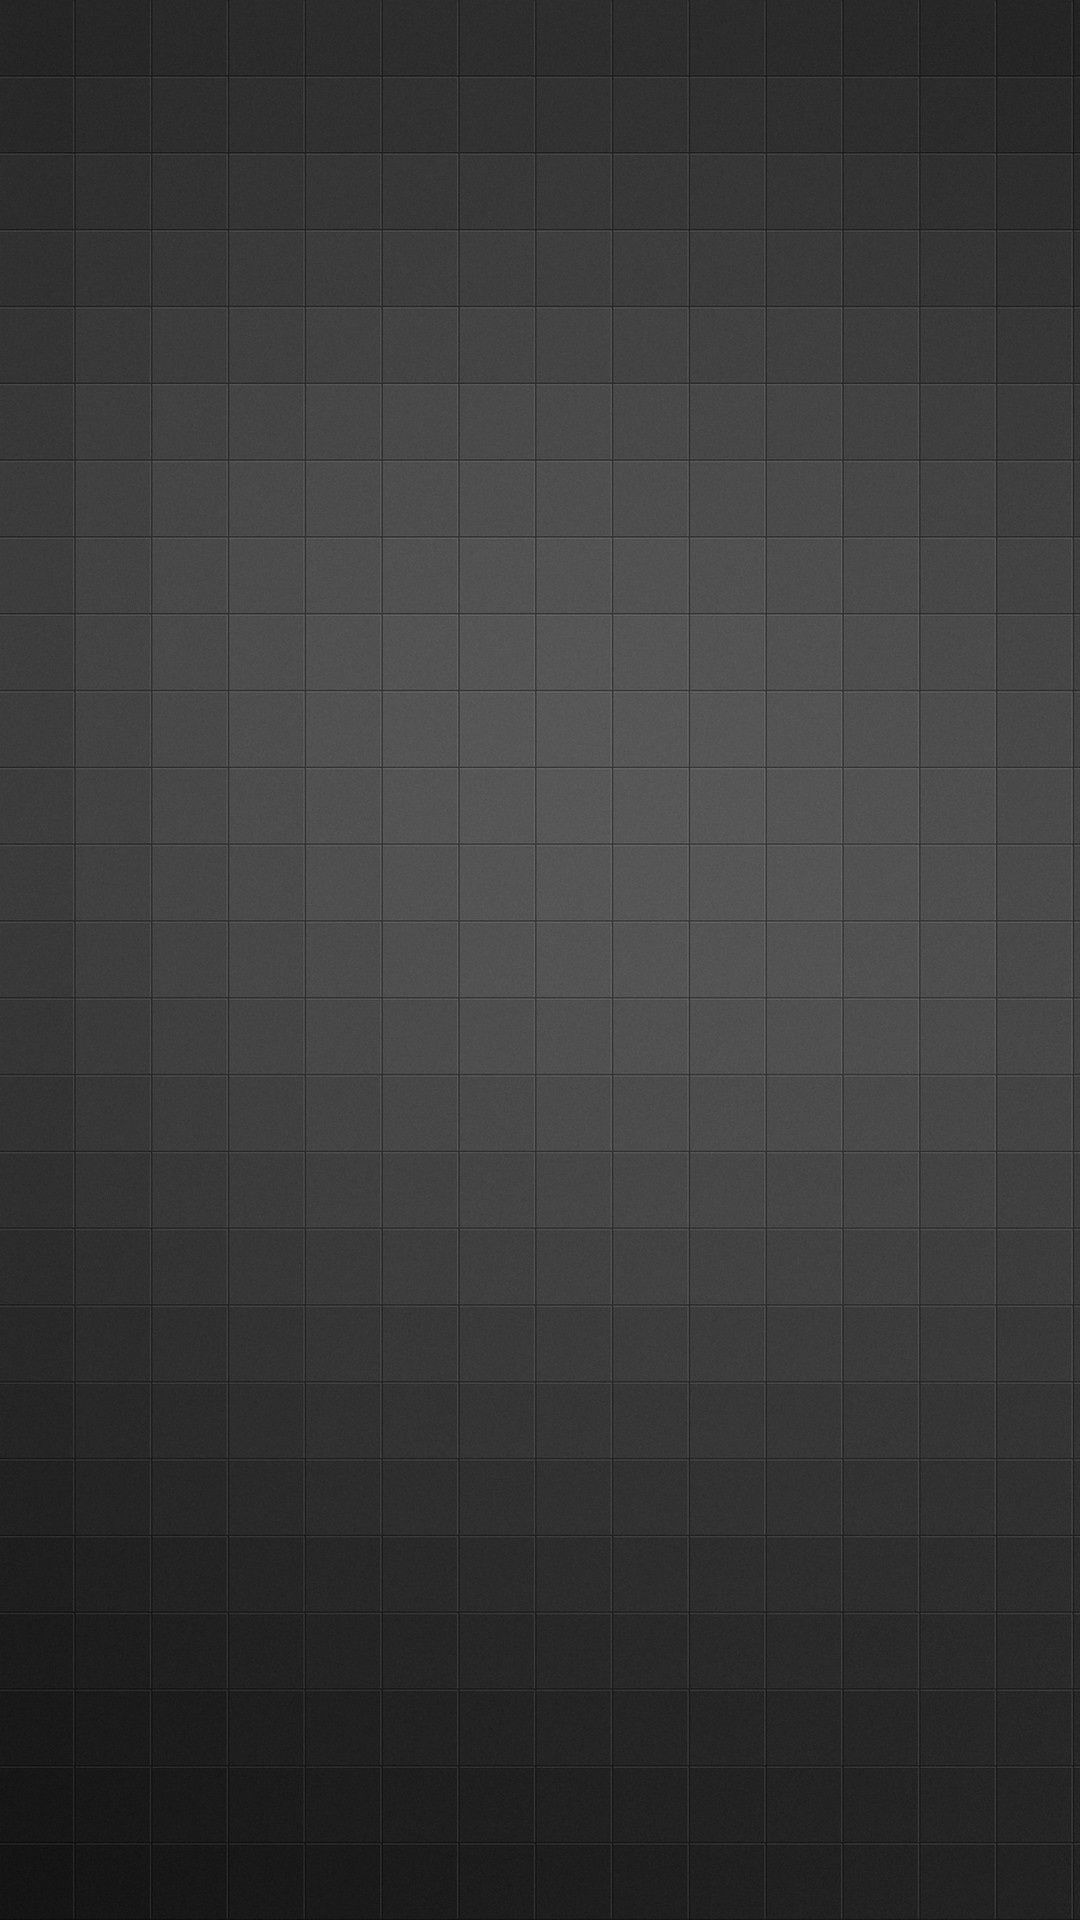 iPhone 6 Wallpapers: Dark Patterns - iPhone6wp.com